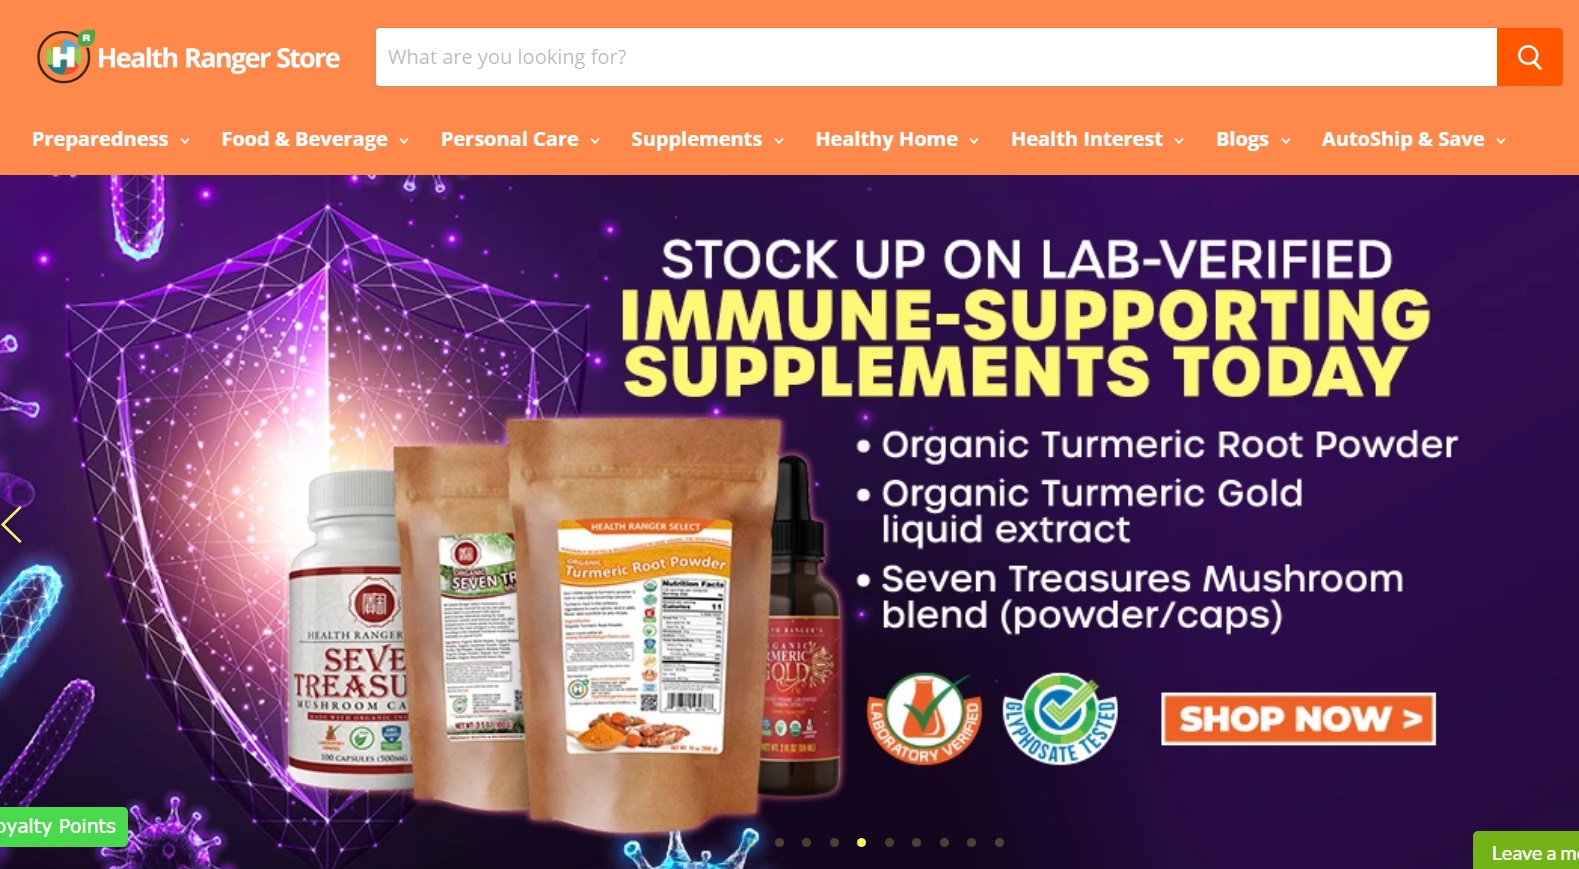 Image: The Health Ranger Store has been “China free” since 2014… now the rest of the supplements industry is following our lead due to the coronavirus